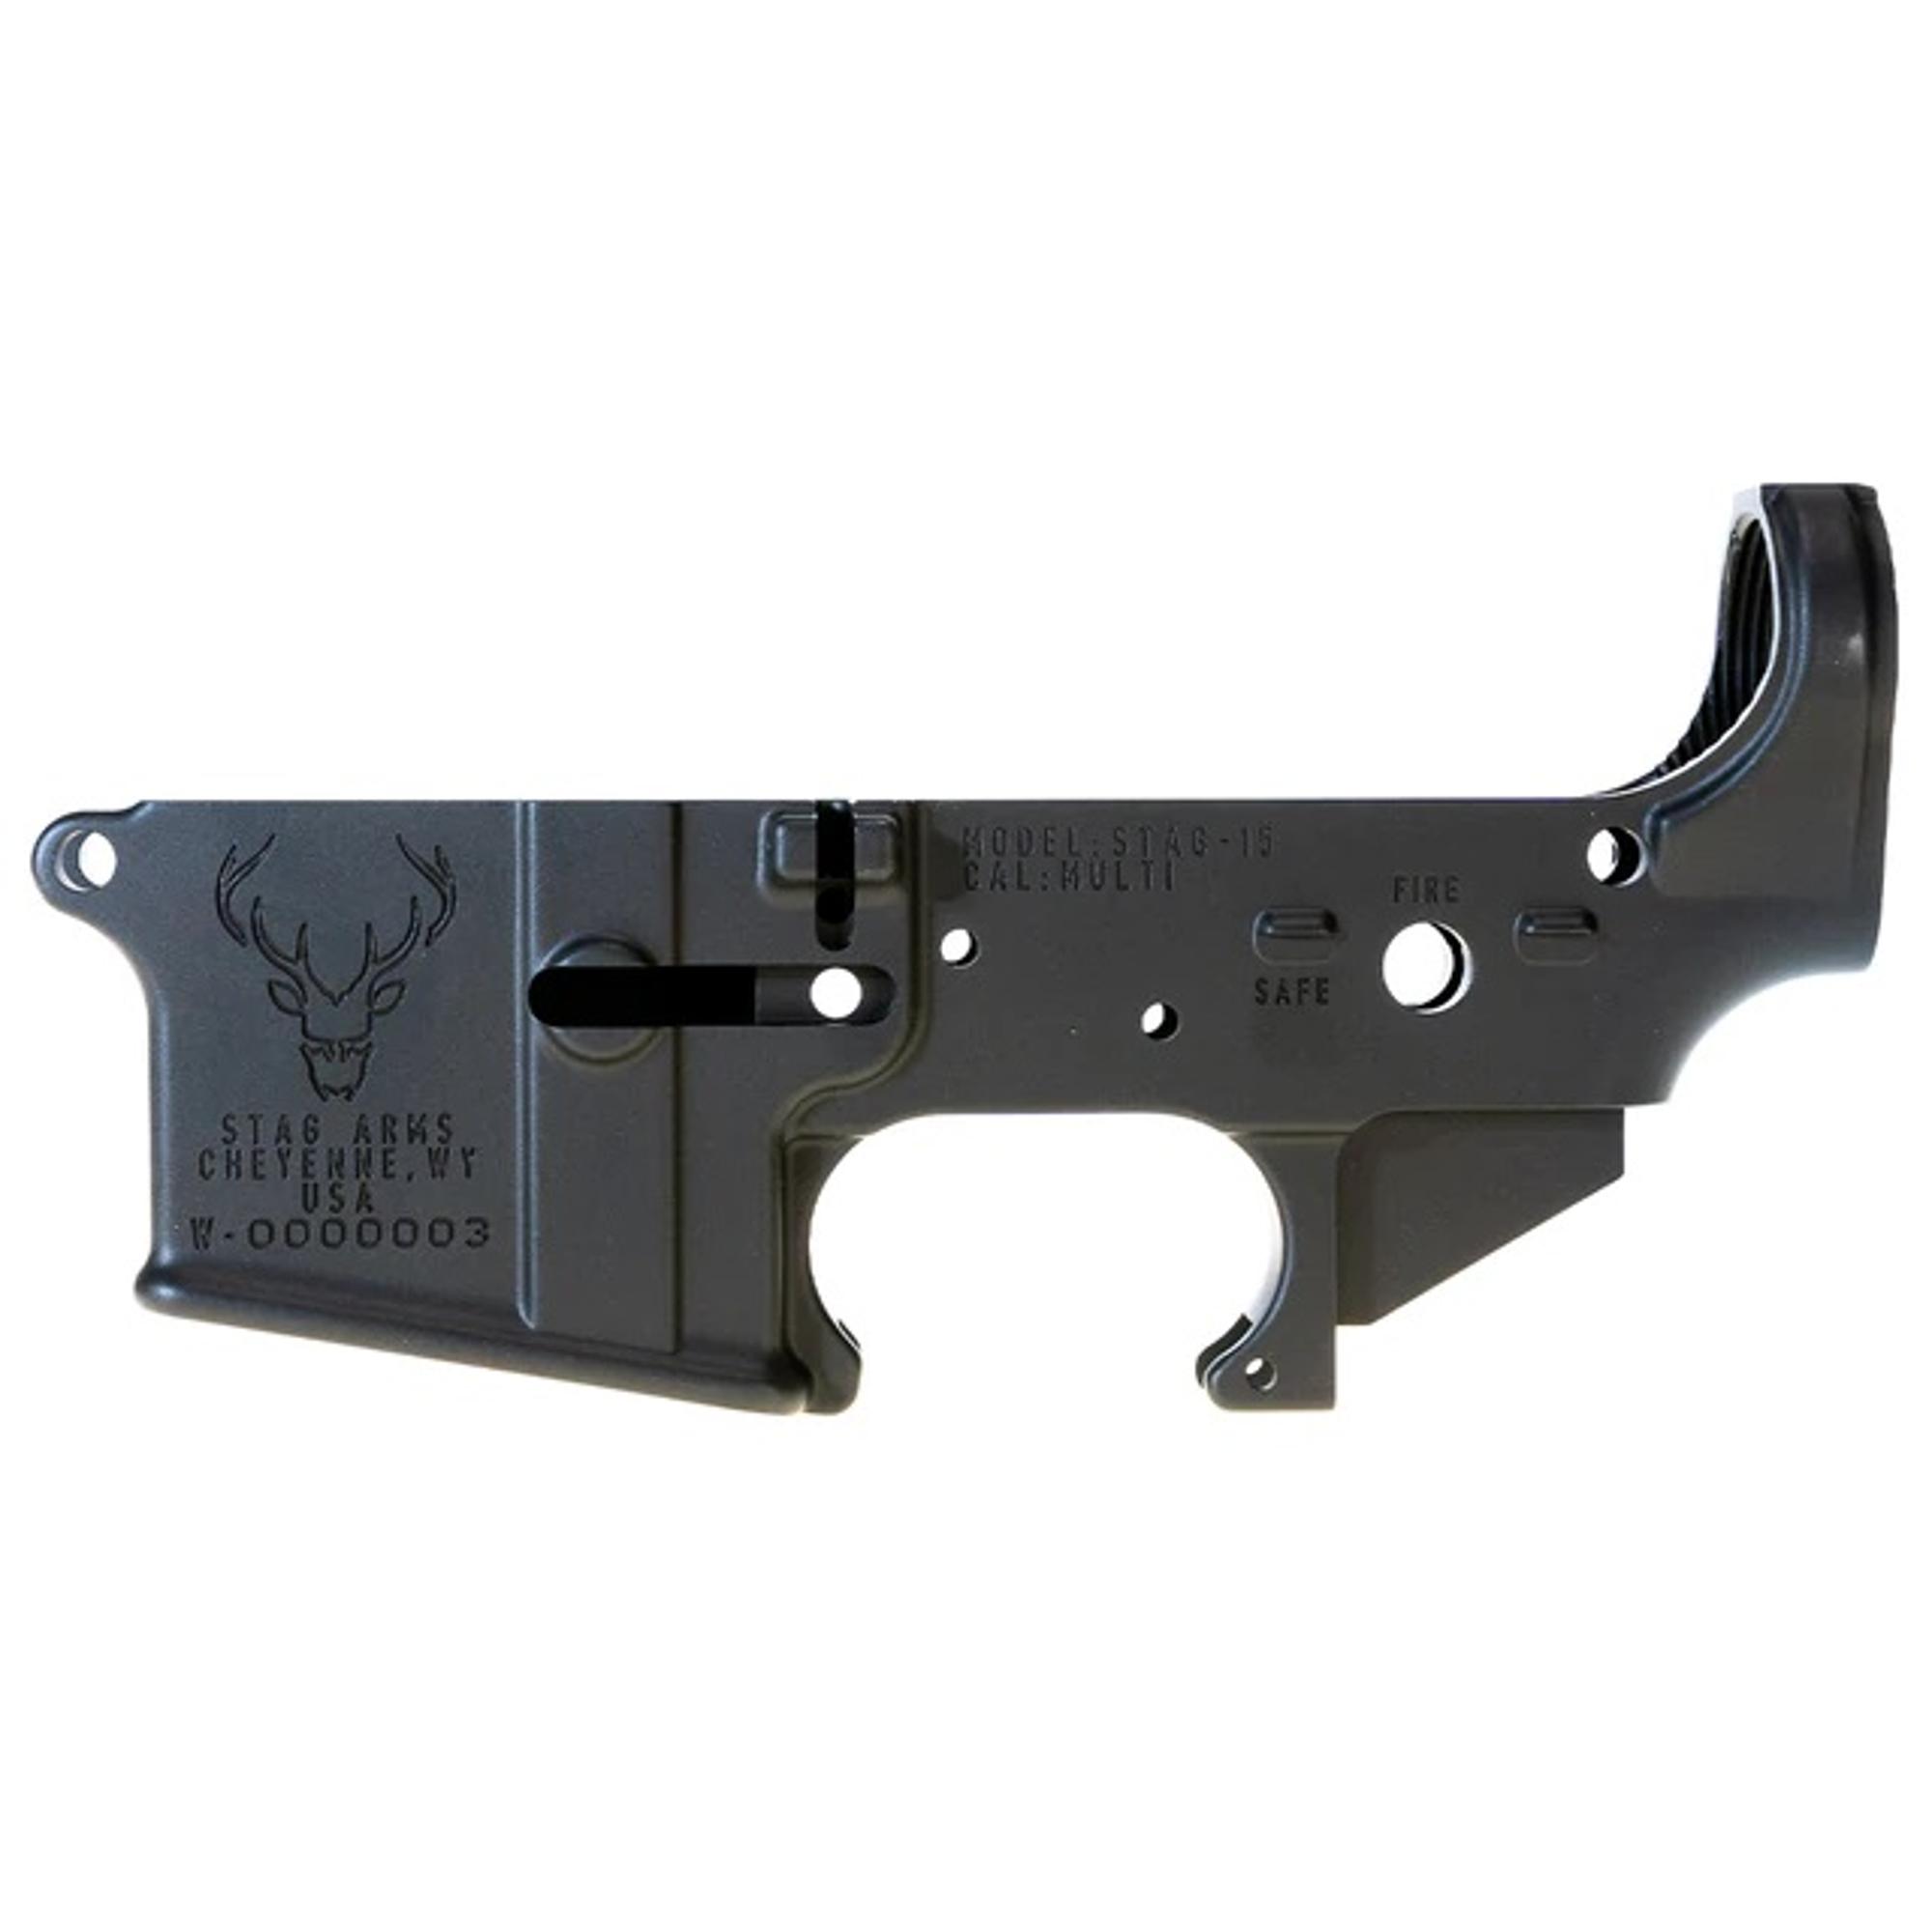 Stag 15 Stripped Lower